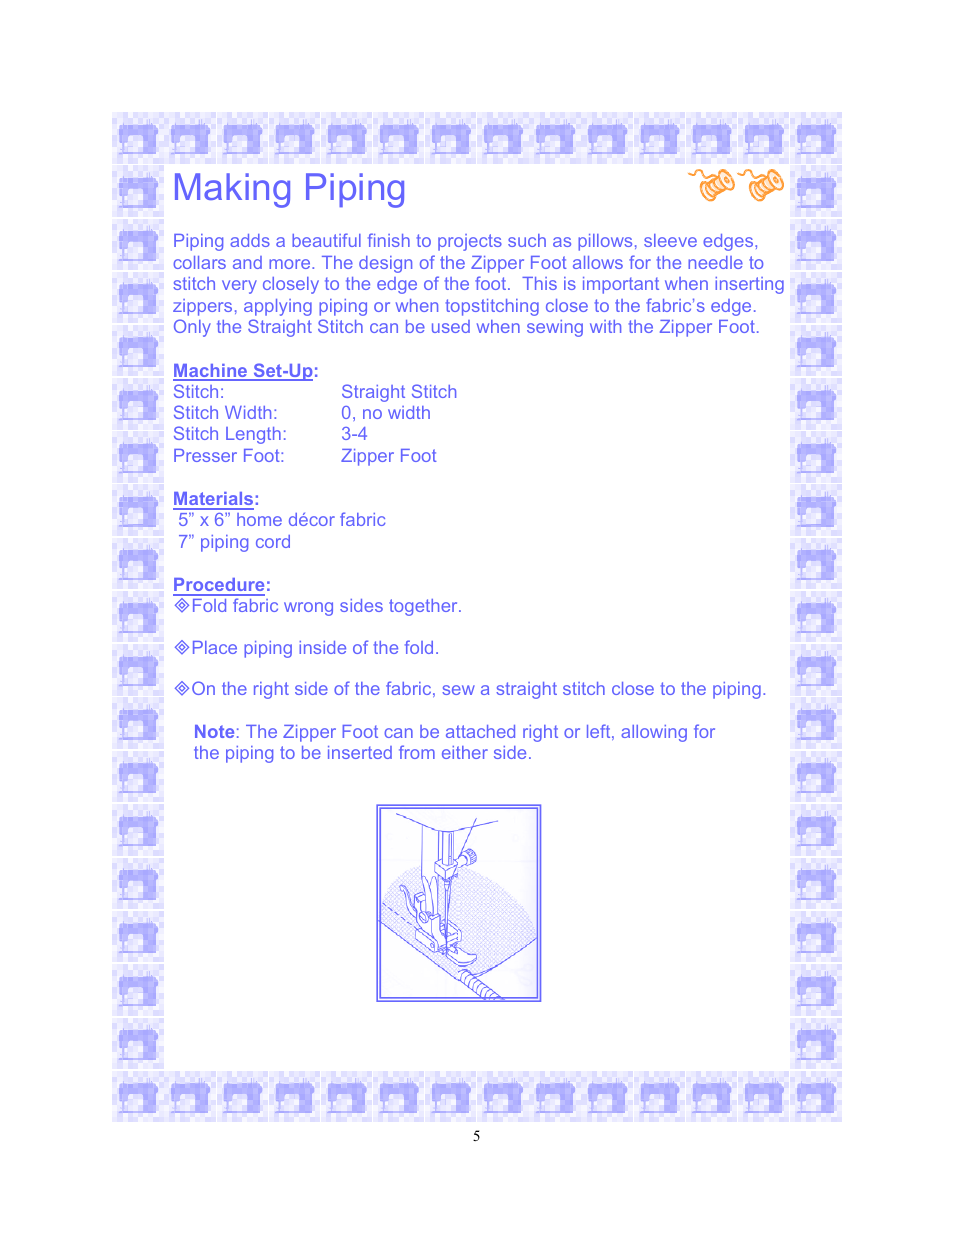 Making piping | SINGER 6550-WORKBOOK Scholastic User Manual | Page 9 / 59